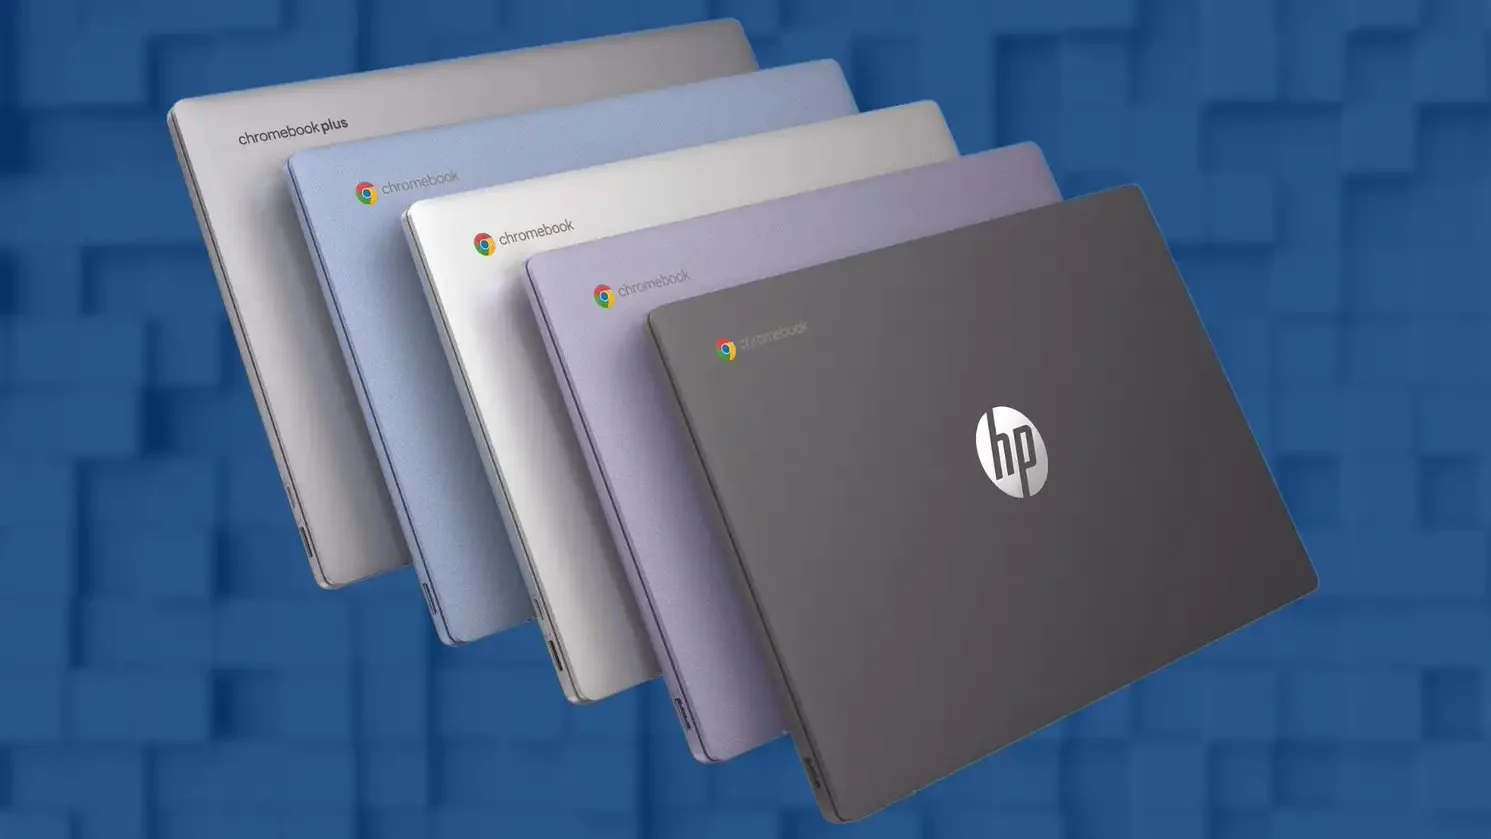 HP Unveils 4 New 14-inch Chromebooks, Starting from $300 (2170 Yuan) - News - News